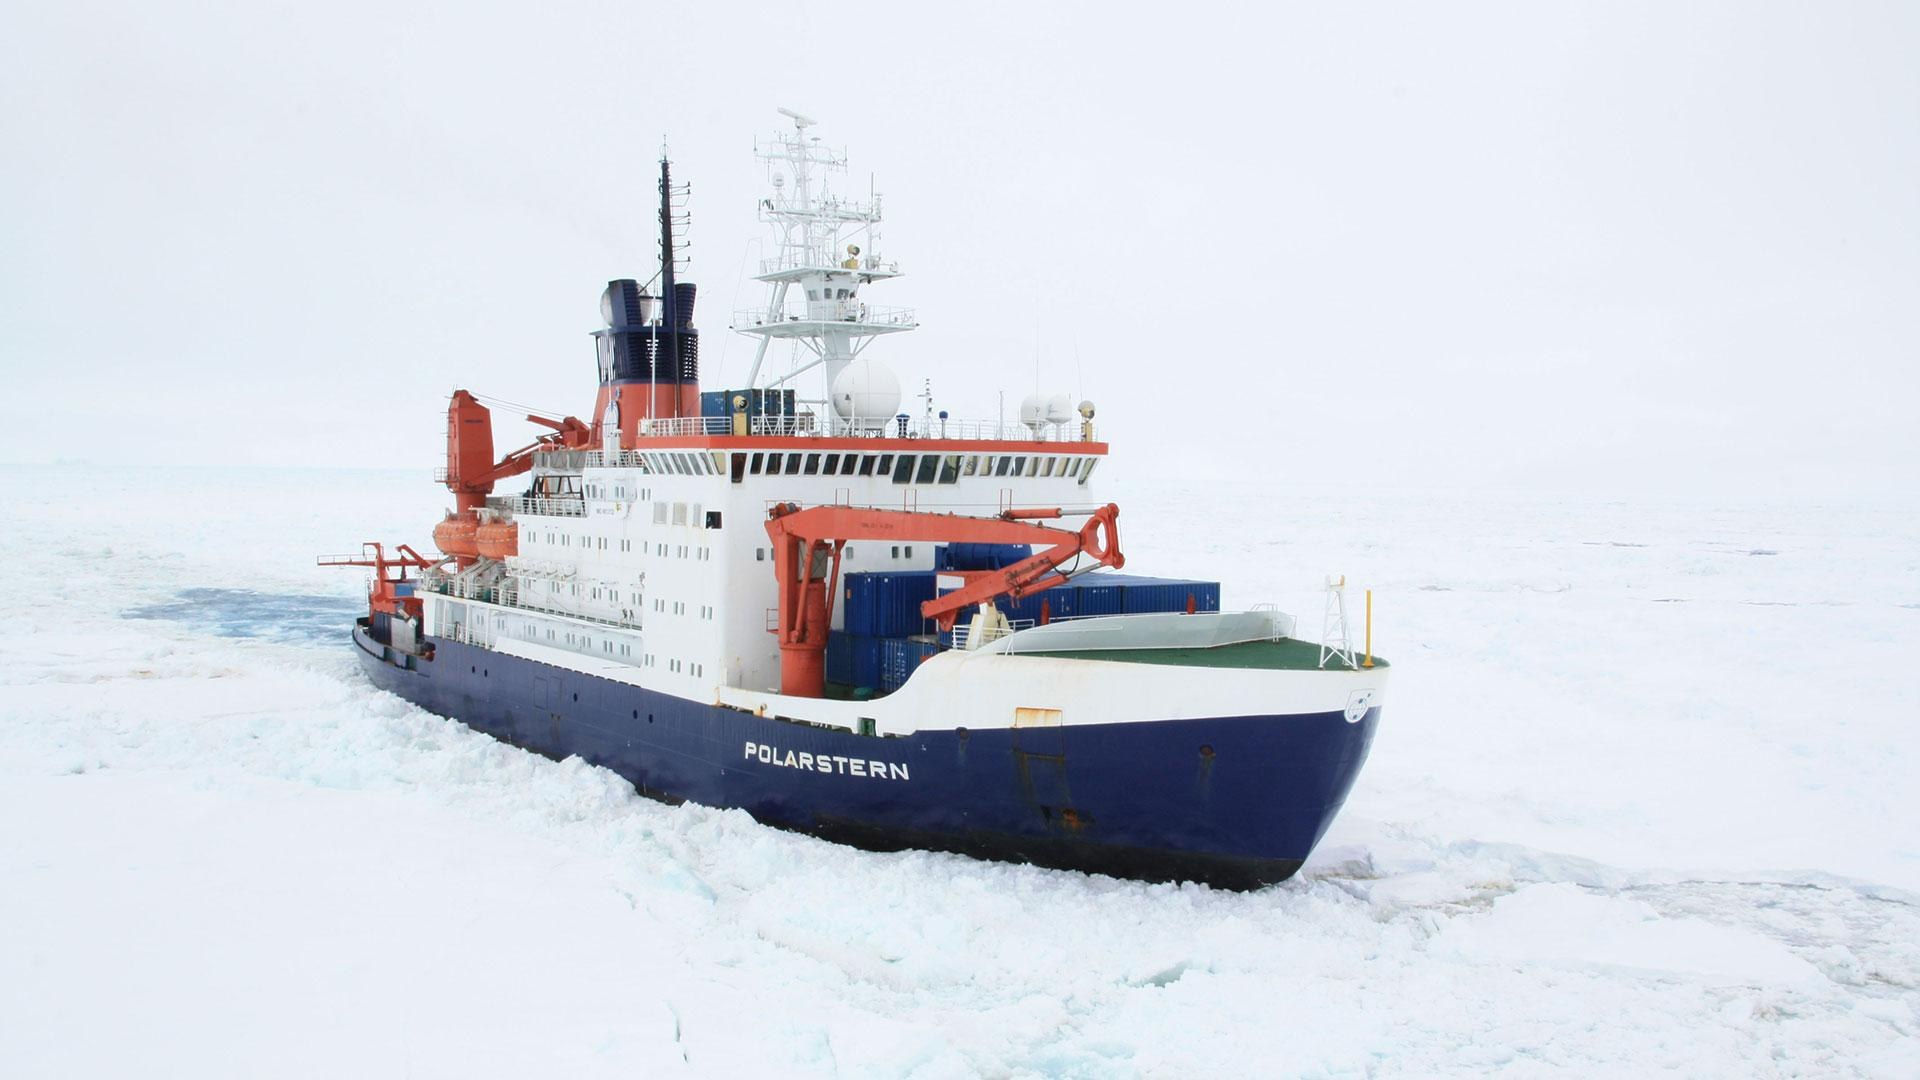 The Polarstern research icebreaker moving through the ice